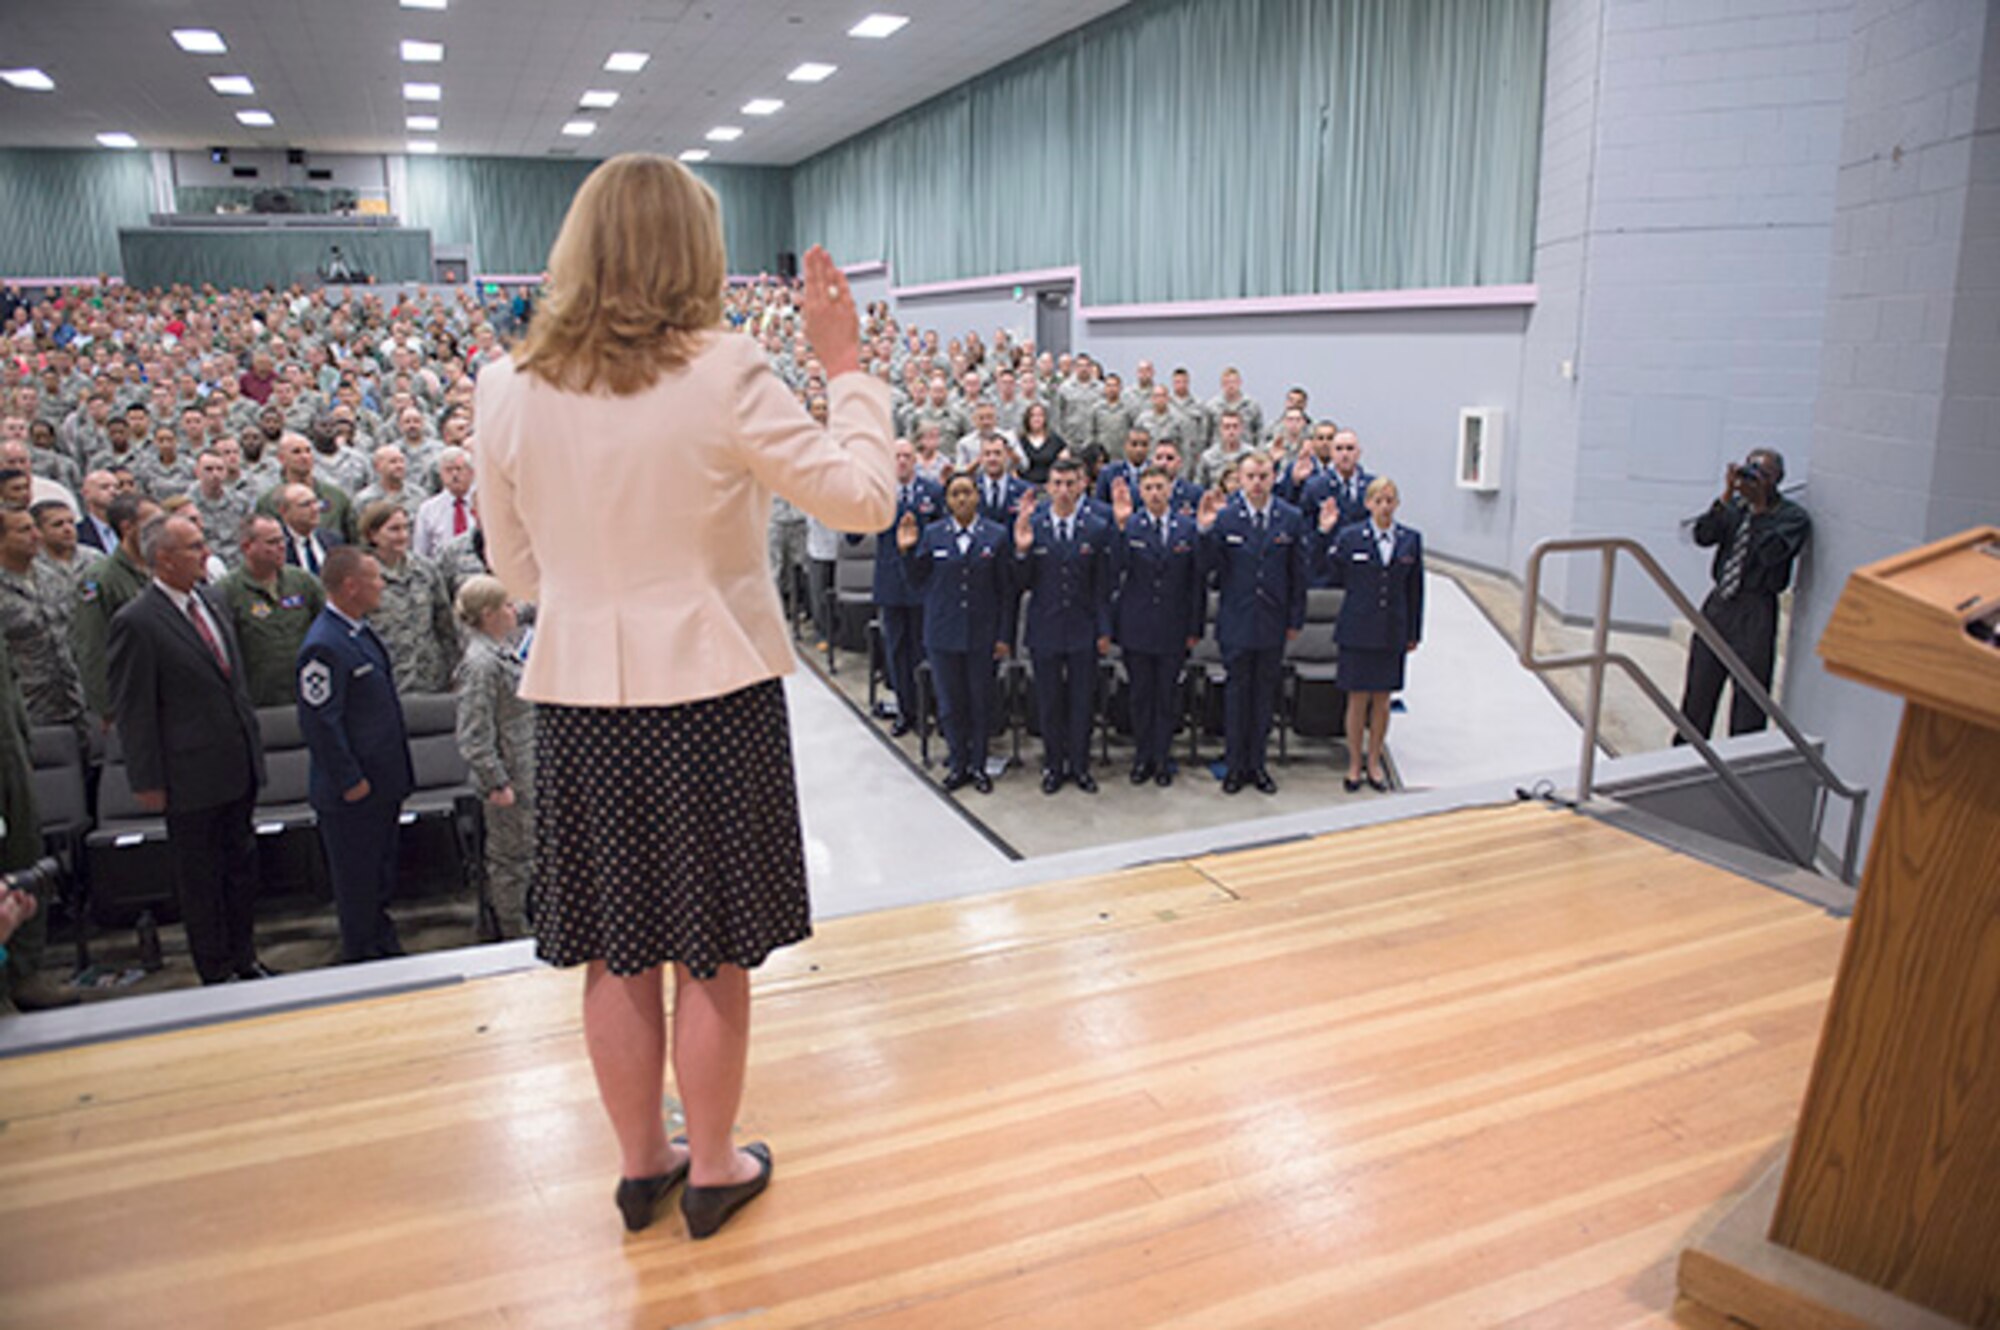 Secretary of the Air Force Deborah Lee James administers the oath of enlistment to Edwards Airmen during her visit to Edwards Tuesday and Wednesday.